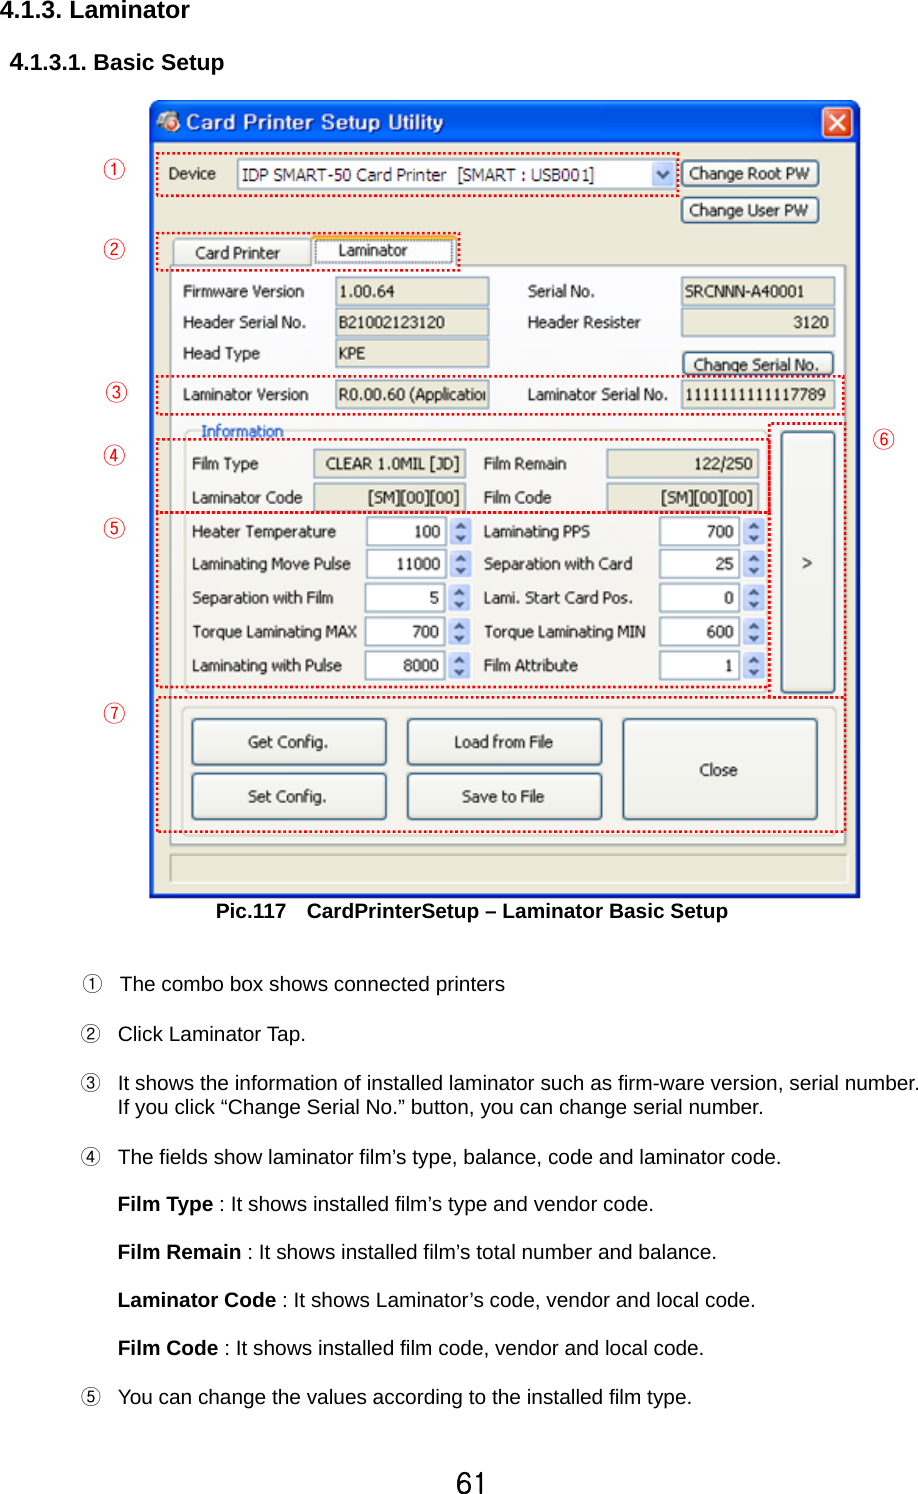 61   4.1.3. Laminator     4.1.3.1. Basic Setup   Pic.117    CardPrinterSetup – Laminator Basic Setup   ①  The combo box shows connected printers  ② Click Laminator Tap.   ③  It shows the information of installed laminator such as firm-ware version, serial number. If you click “Change Serial No.” button, you can change serial number.   ④  The fields show laminator film’s type, balance, code and laminator code.    Film Type : It shows installed film’s type and vendor code.  Film Remain : It shows installed film’s total number and balance.    Laminator Code : It shows Laminator’s code, vendor and local code.    Film Code : It shows installed film code, vendor and local code.  ⑤  You can change the values according to the installed film type.  ① ② ③ ④ ⑤ ⑥ ⑦ 